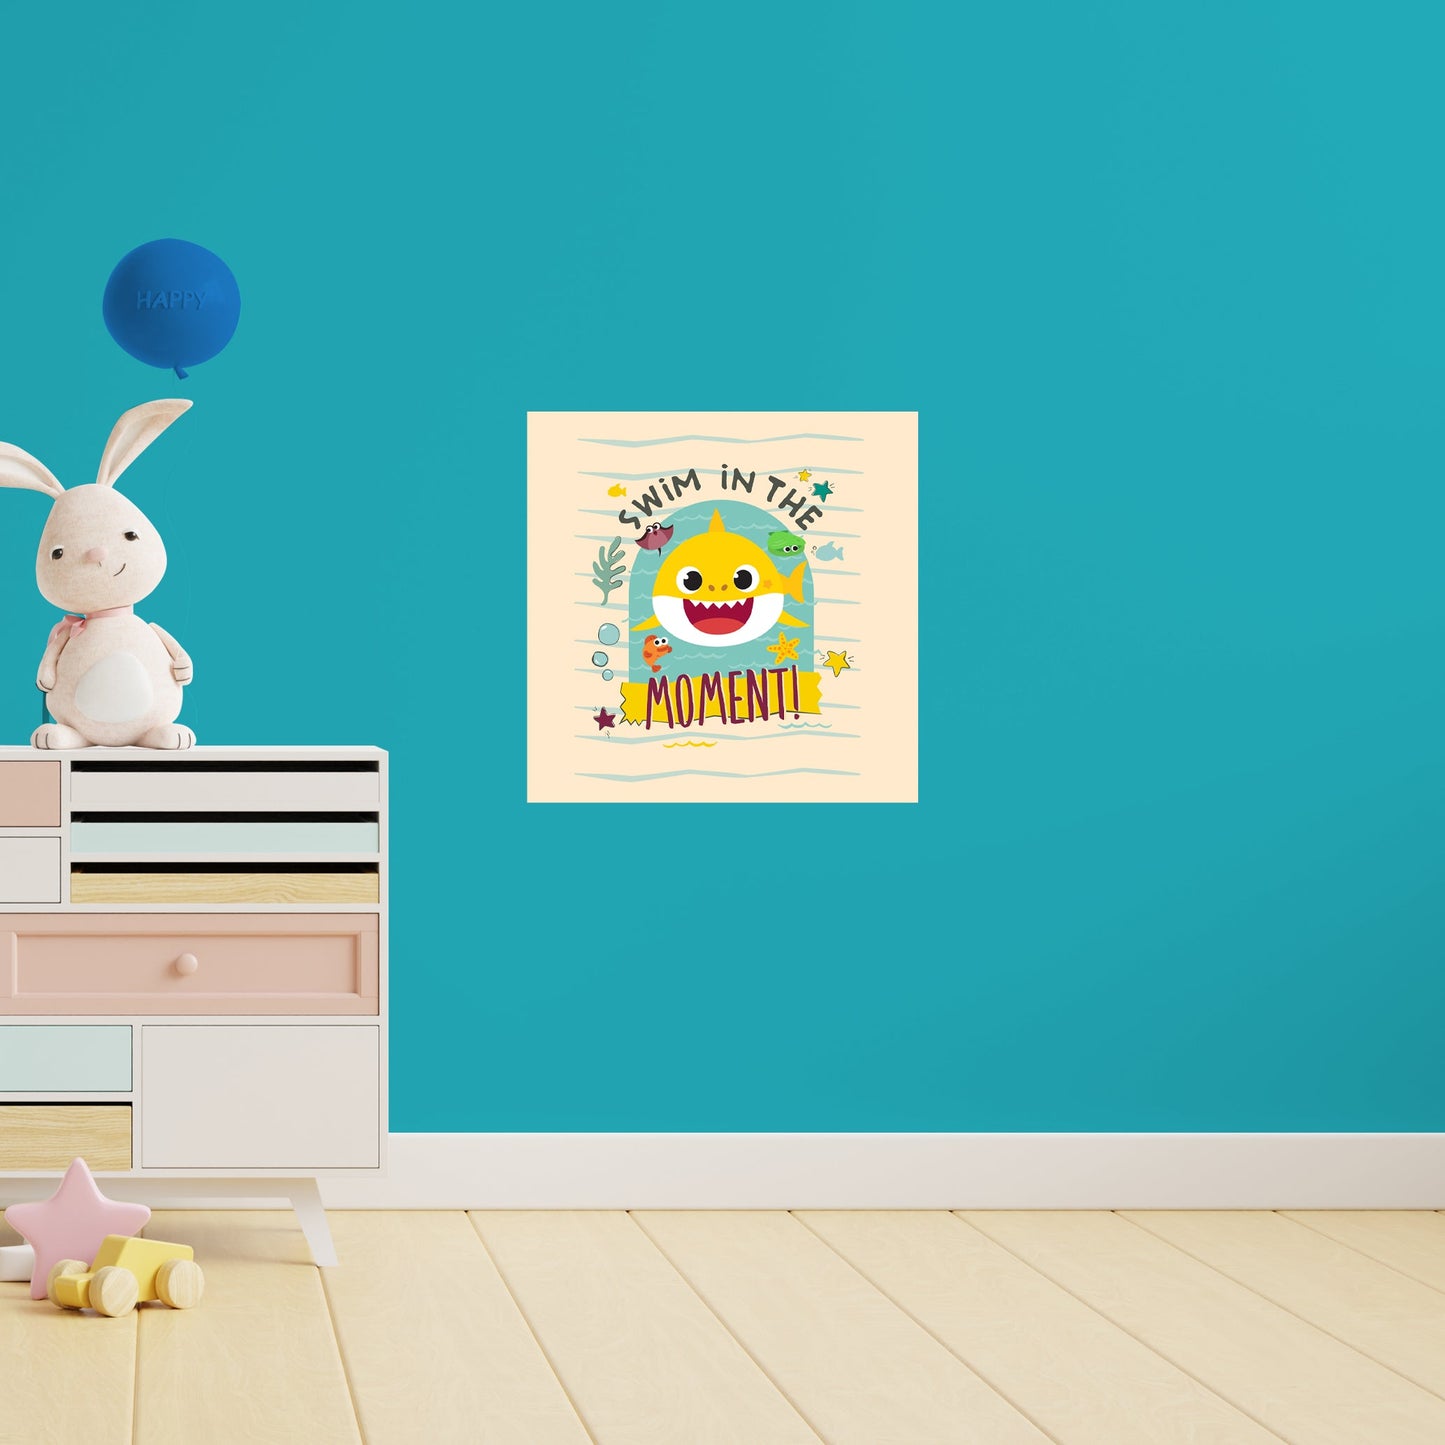 Baby Shark: Your Moment Poster - Officially Licensed Nickelodeon Removable Adhesive Decal